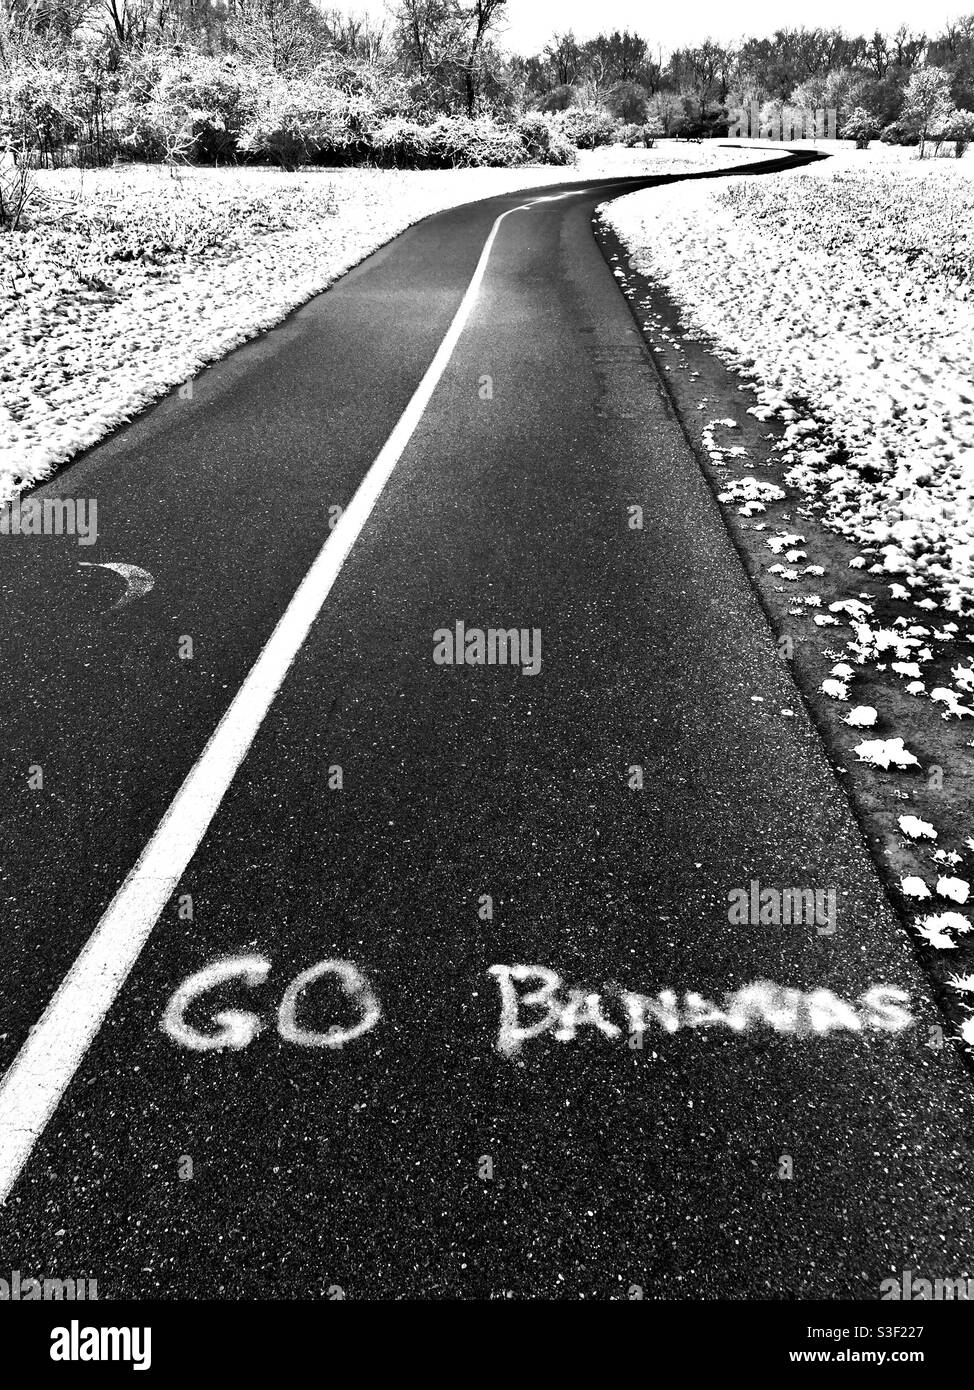 Fresh Snow and a curvy path marked with the cryptic message, go bananas, in B&W, Ontario, Canada. Concepts:towards..., meandering, nonlinear, flow, far, horizon, seasons. Stock Photo